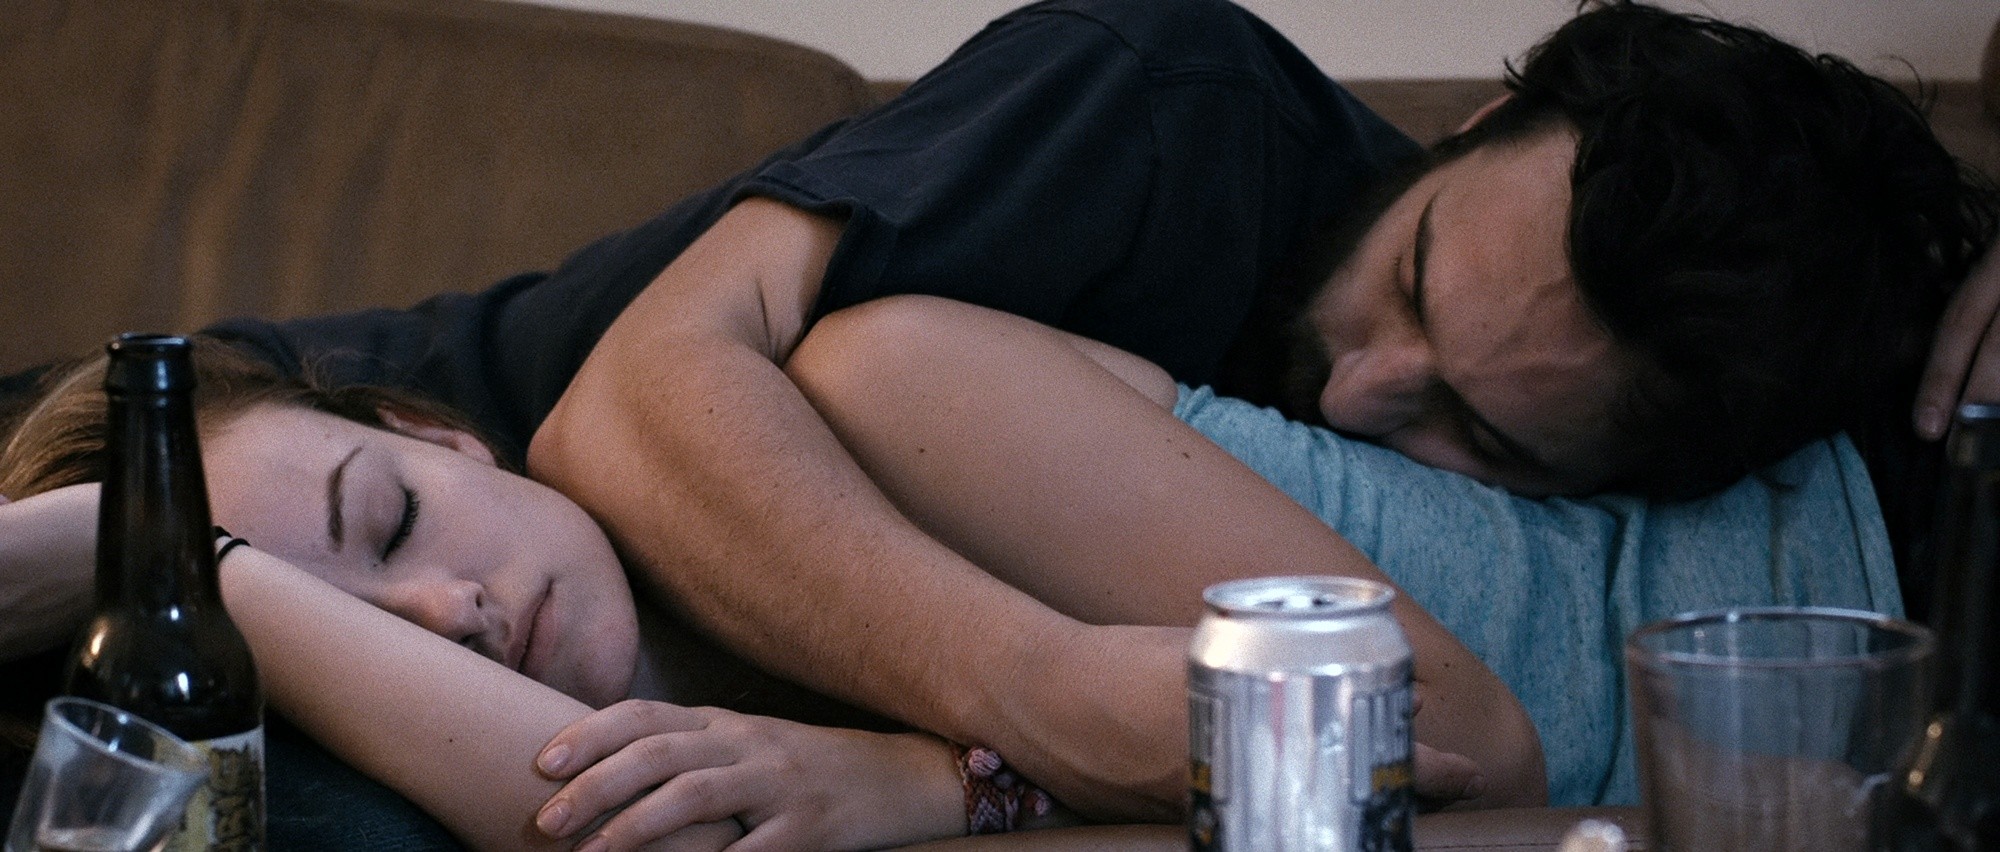 Olivia Wilde stars as Kate and Jake Johnson stars as Luke in Magnolia Pictures' Drinking Buddies (2013)